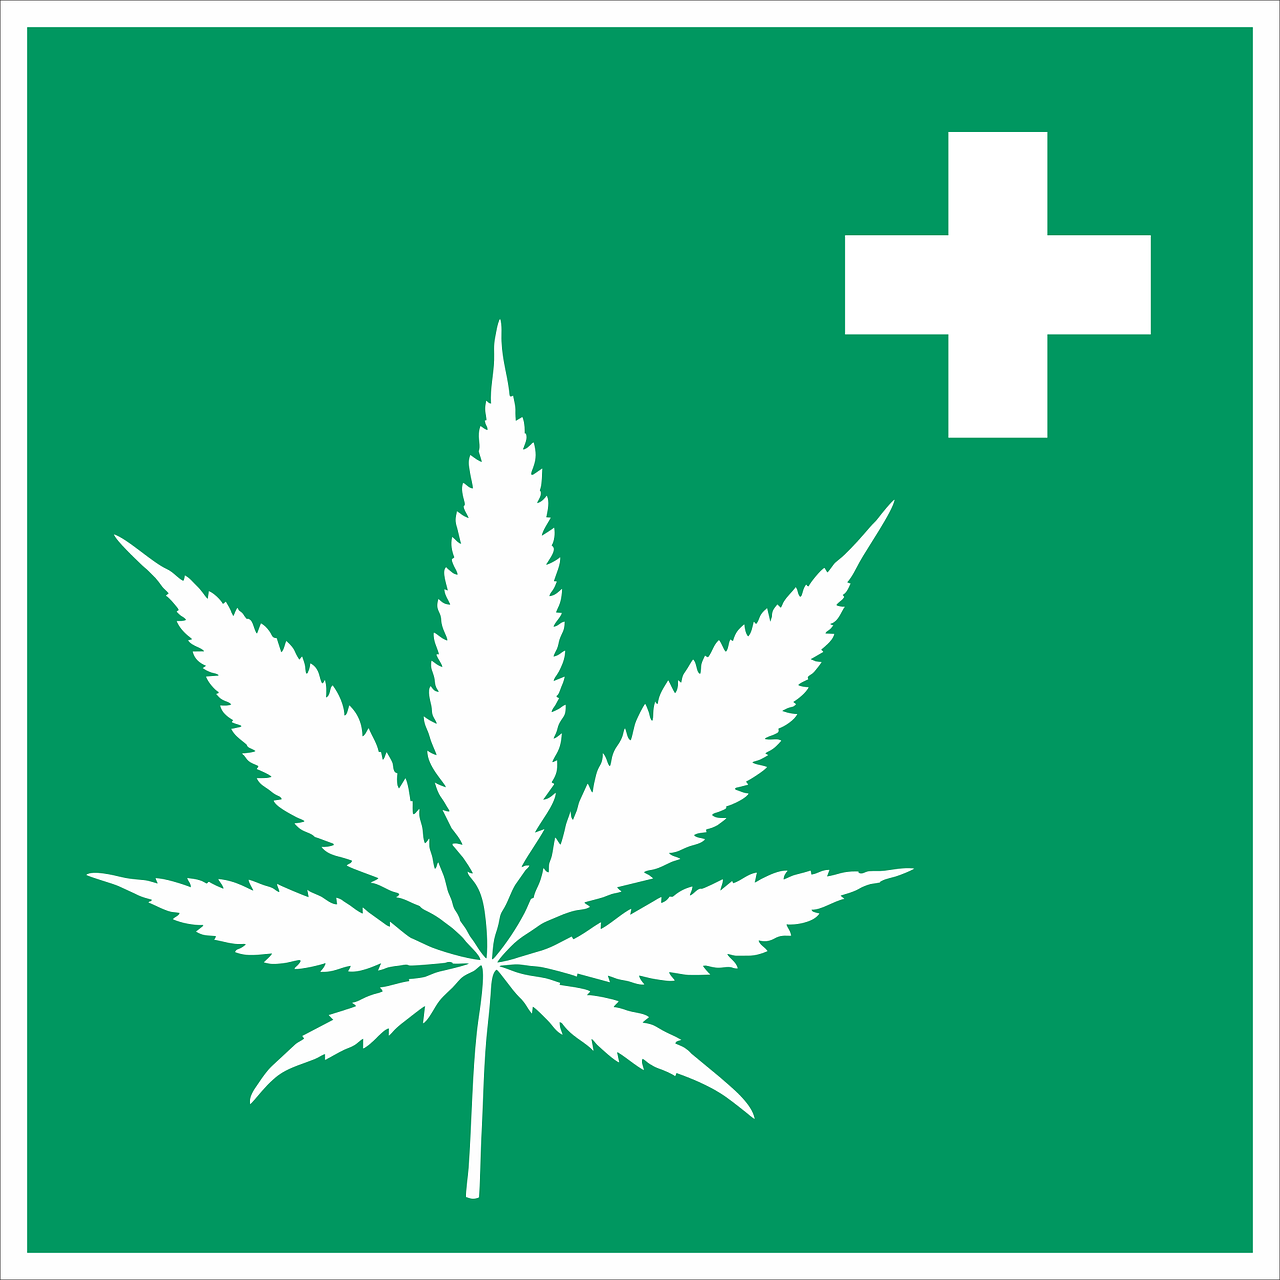 a medical sign with a marijuana leaf on it, shutterstock, hurufiyya, green square, emergency, worksafe. illustration